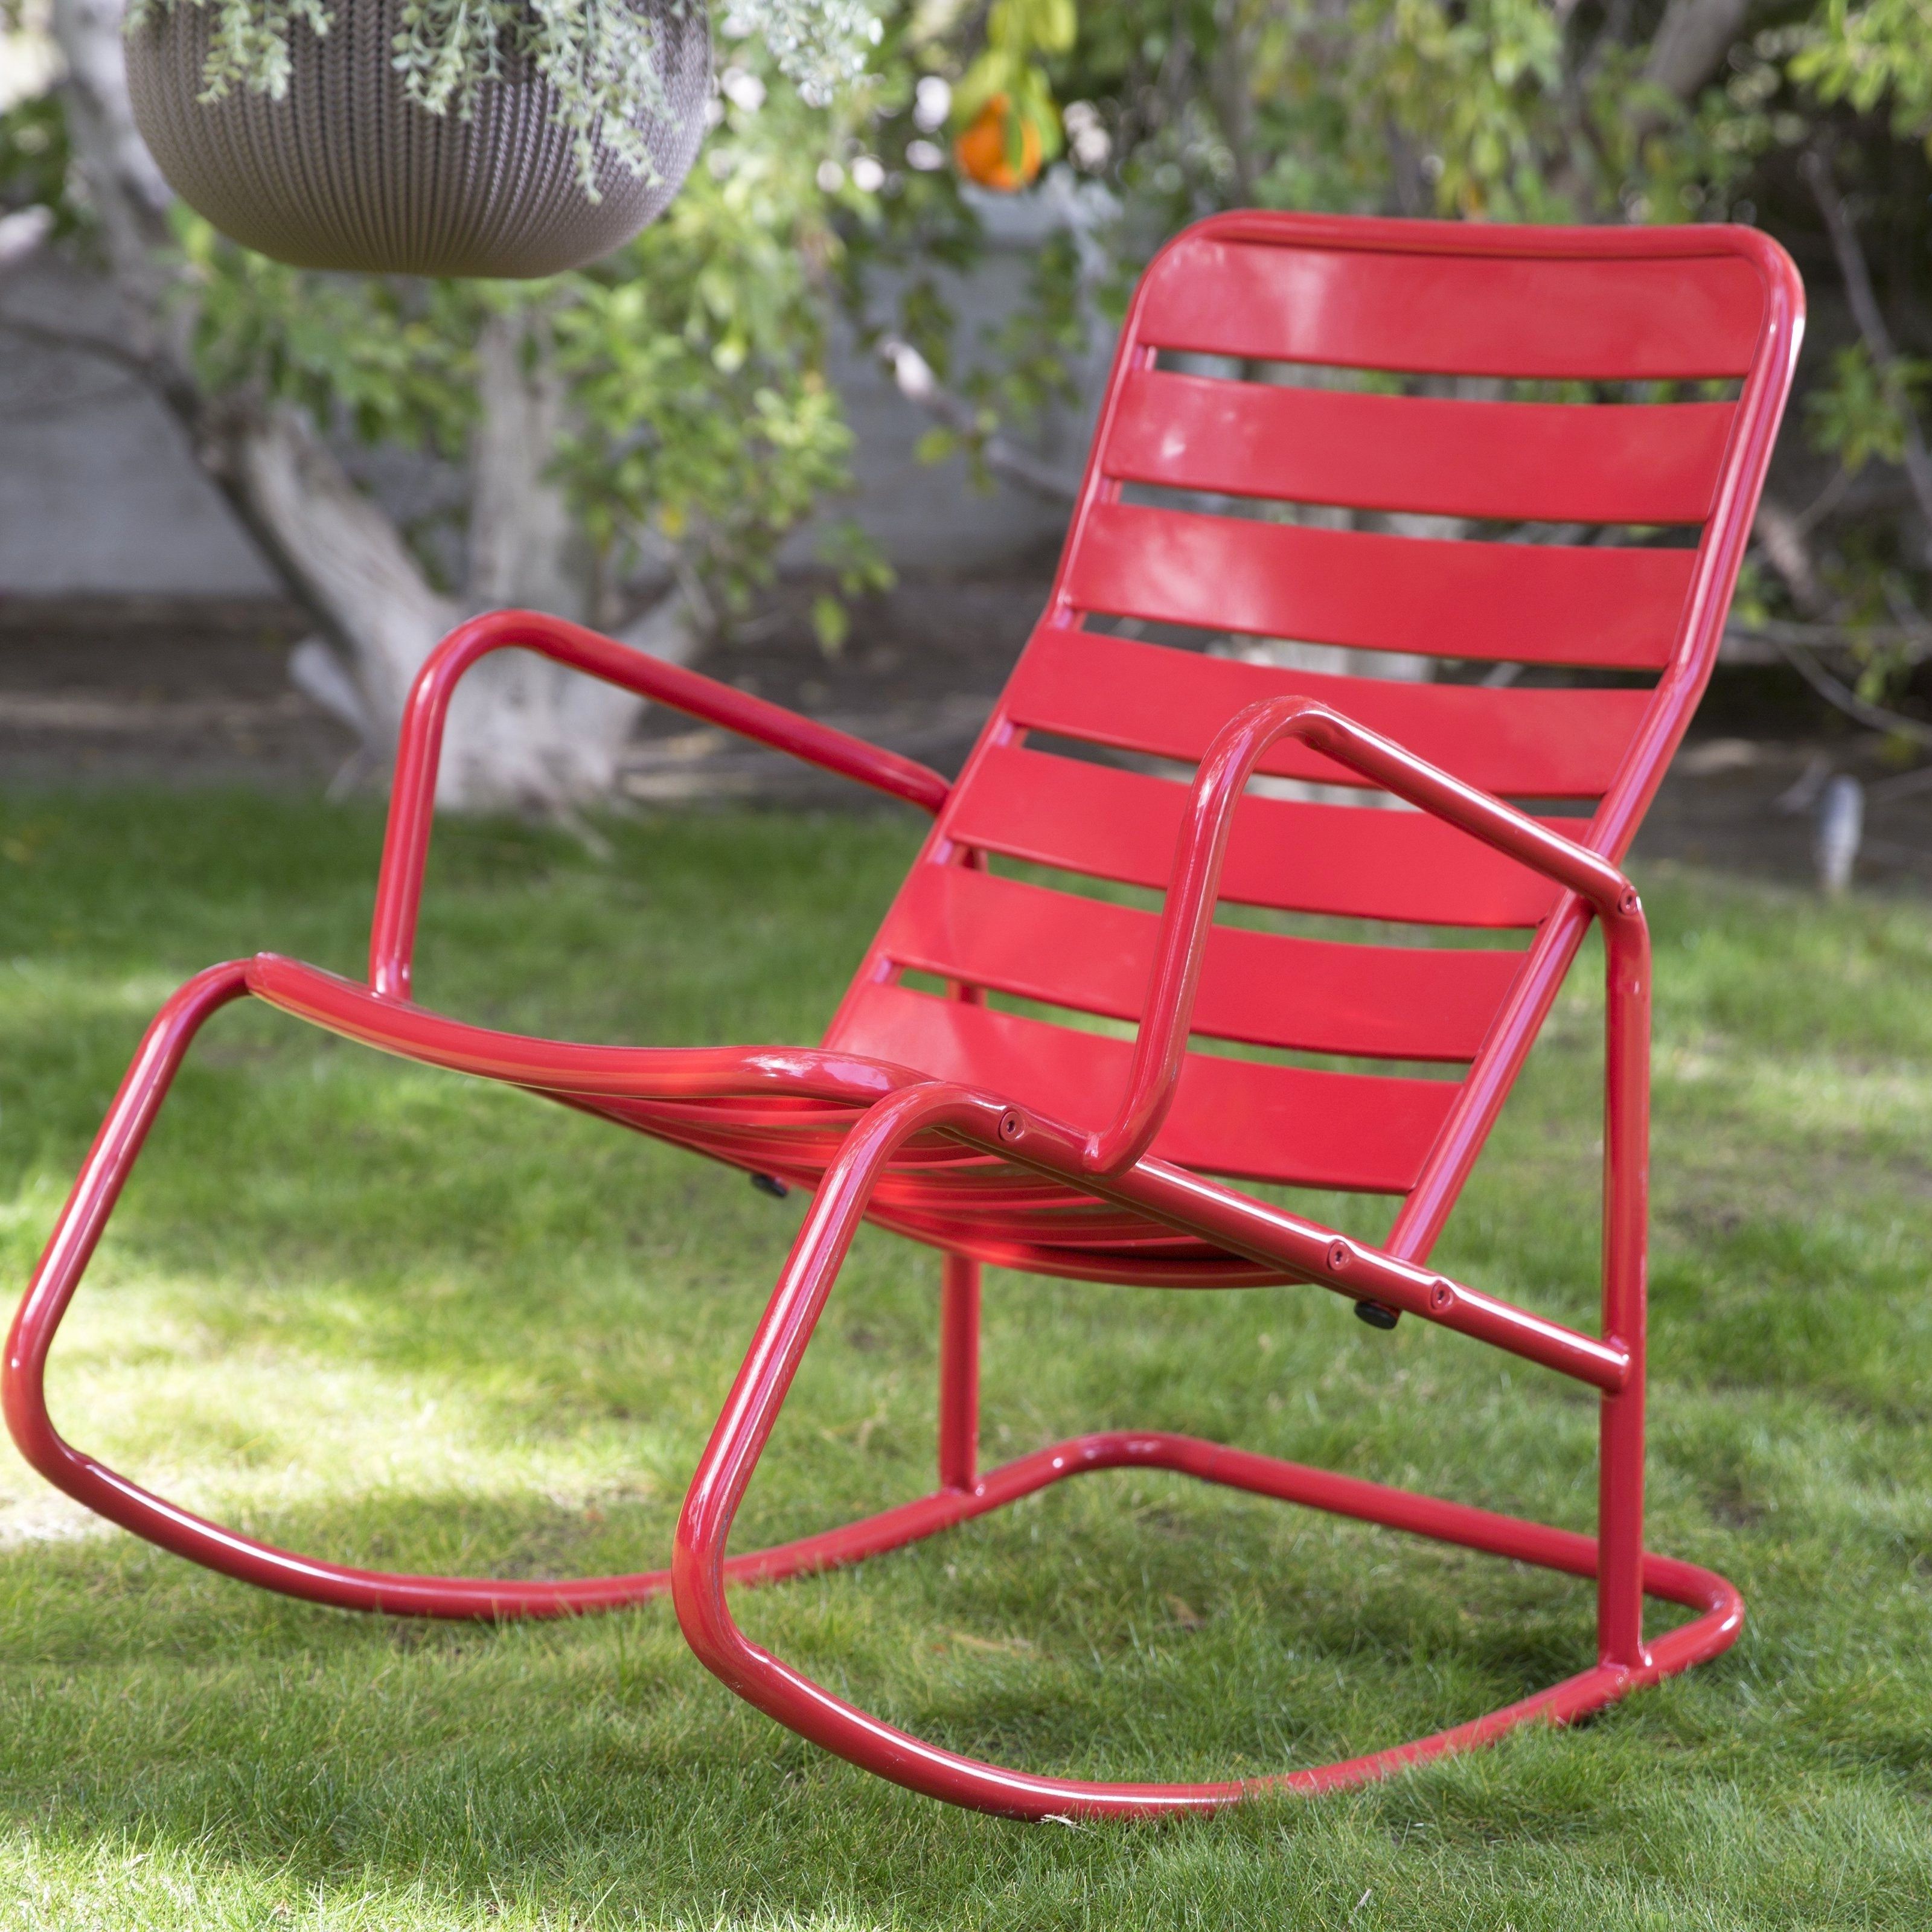 Fashionable Outdoor Patio Metal Rocking Chairs – Outdoor Designs Throughout Outdoor Patio Metal Rocking Chairs (View 1 of 15)